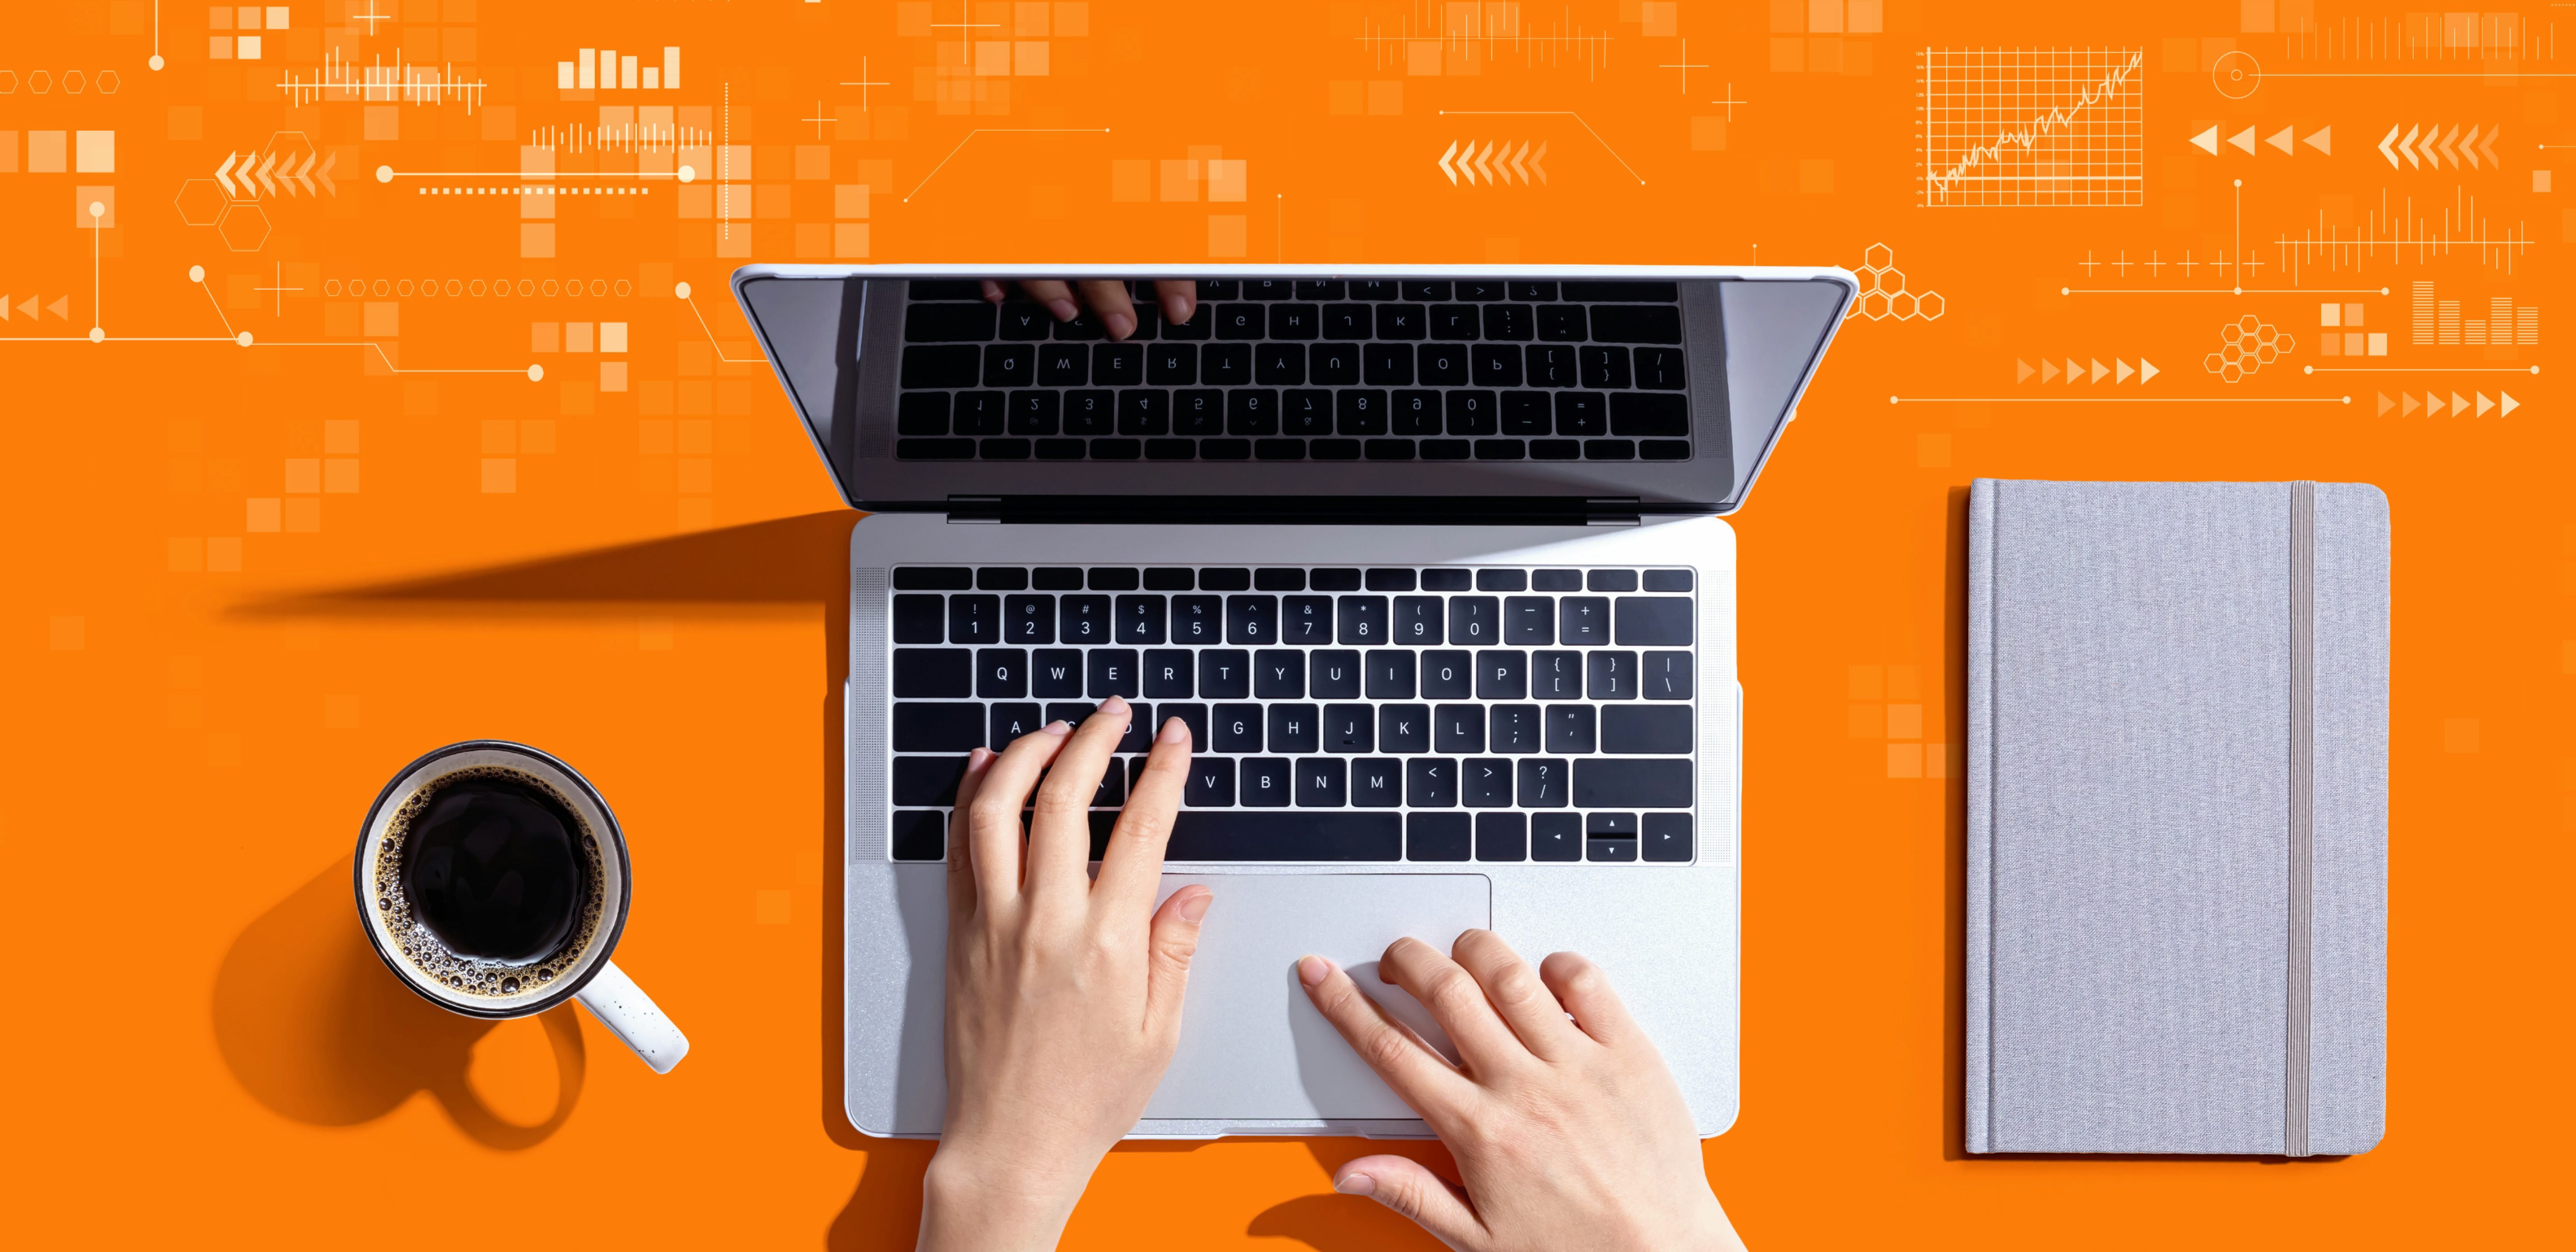 Image of a pair of hands on a laptop, with a coffee cup and notebook nearby, on an orange background